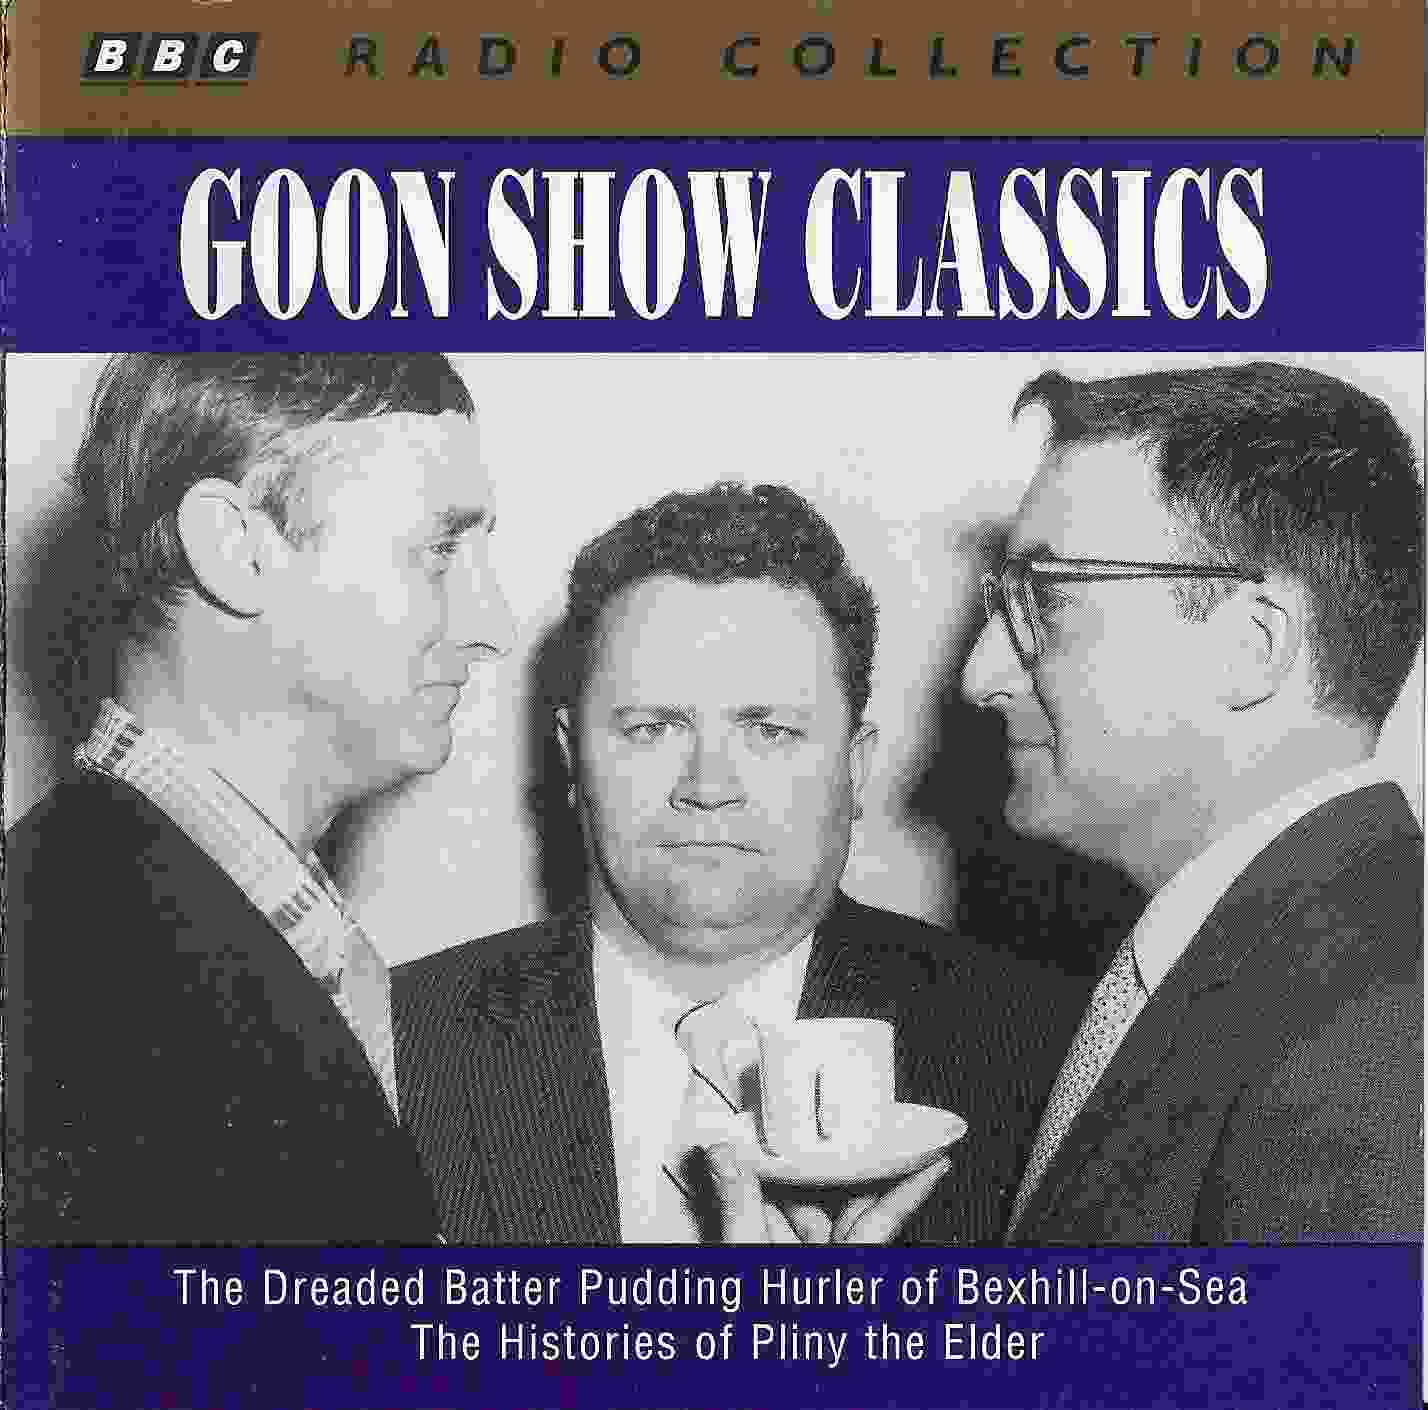 Picture of ZBBC 1737 CD Goon show classics by artist Spike Milligan / Larry Stephens from the BBC cds - Records and Tapes library